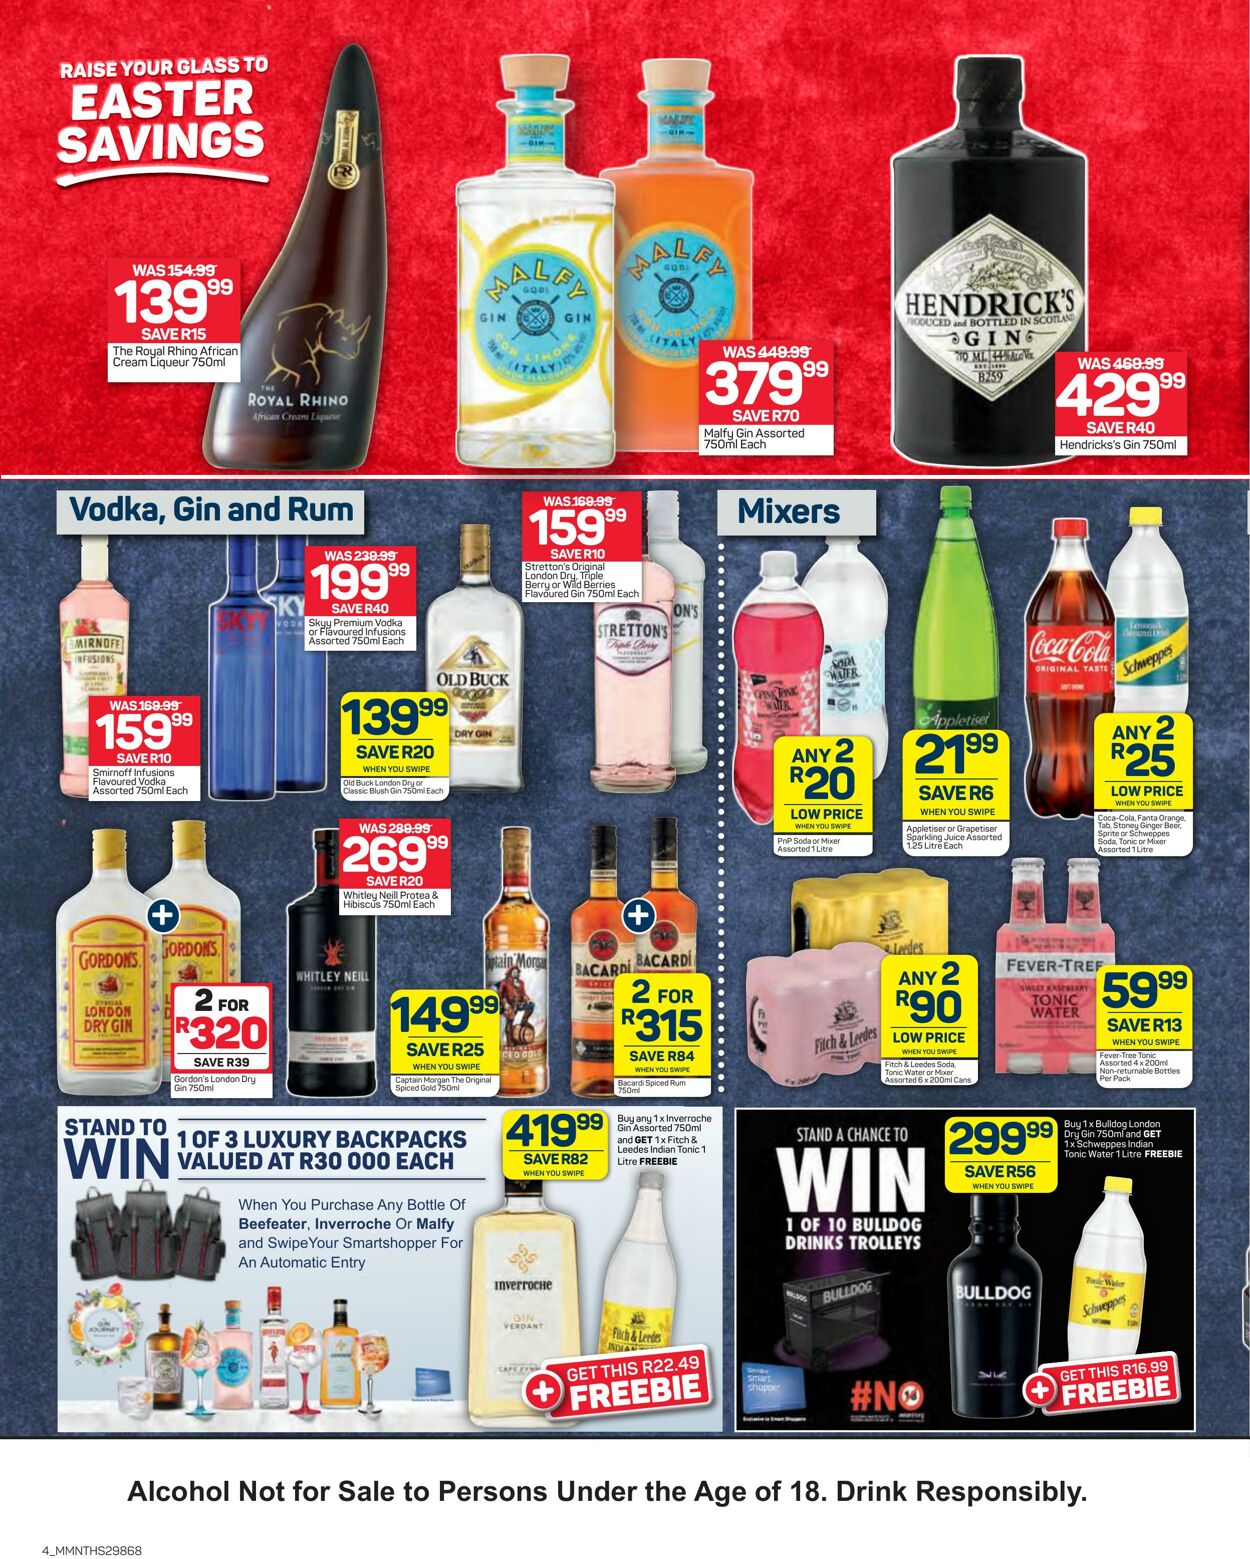 Special Pick n Pay 11.04.2022 - 18.04.2022